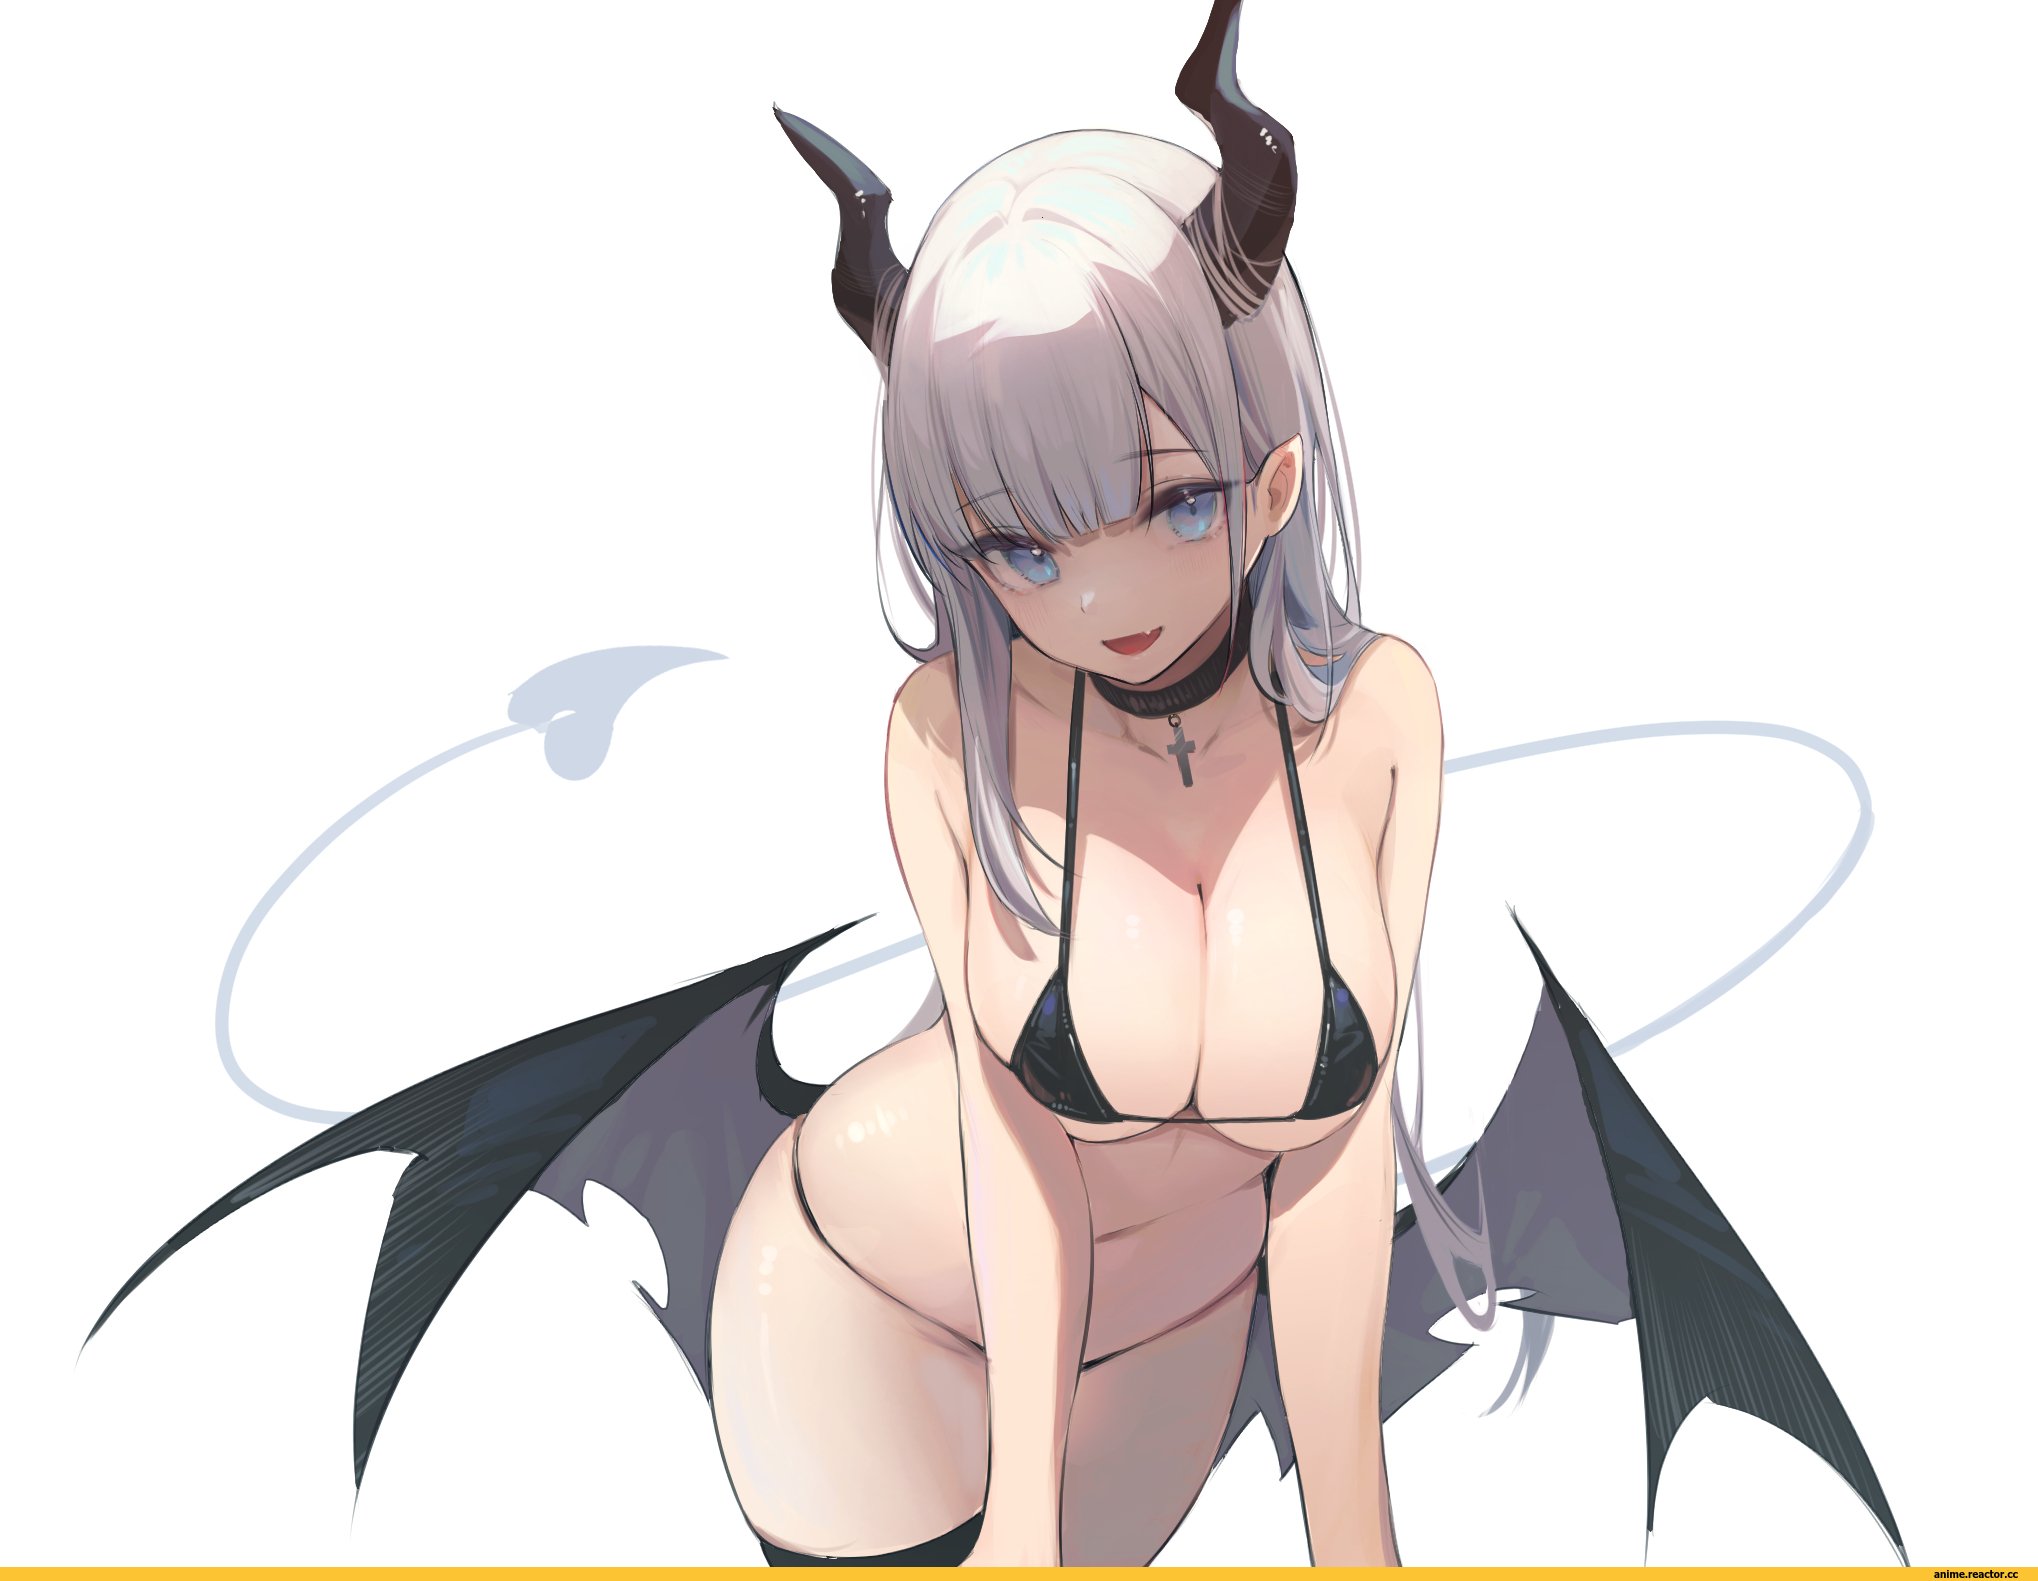 Daily life with succubus